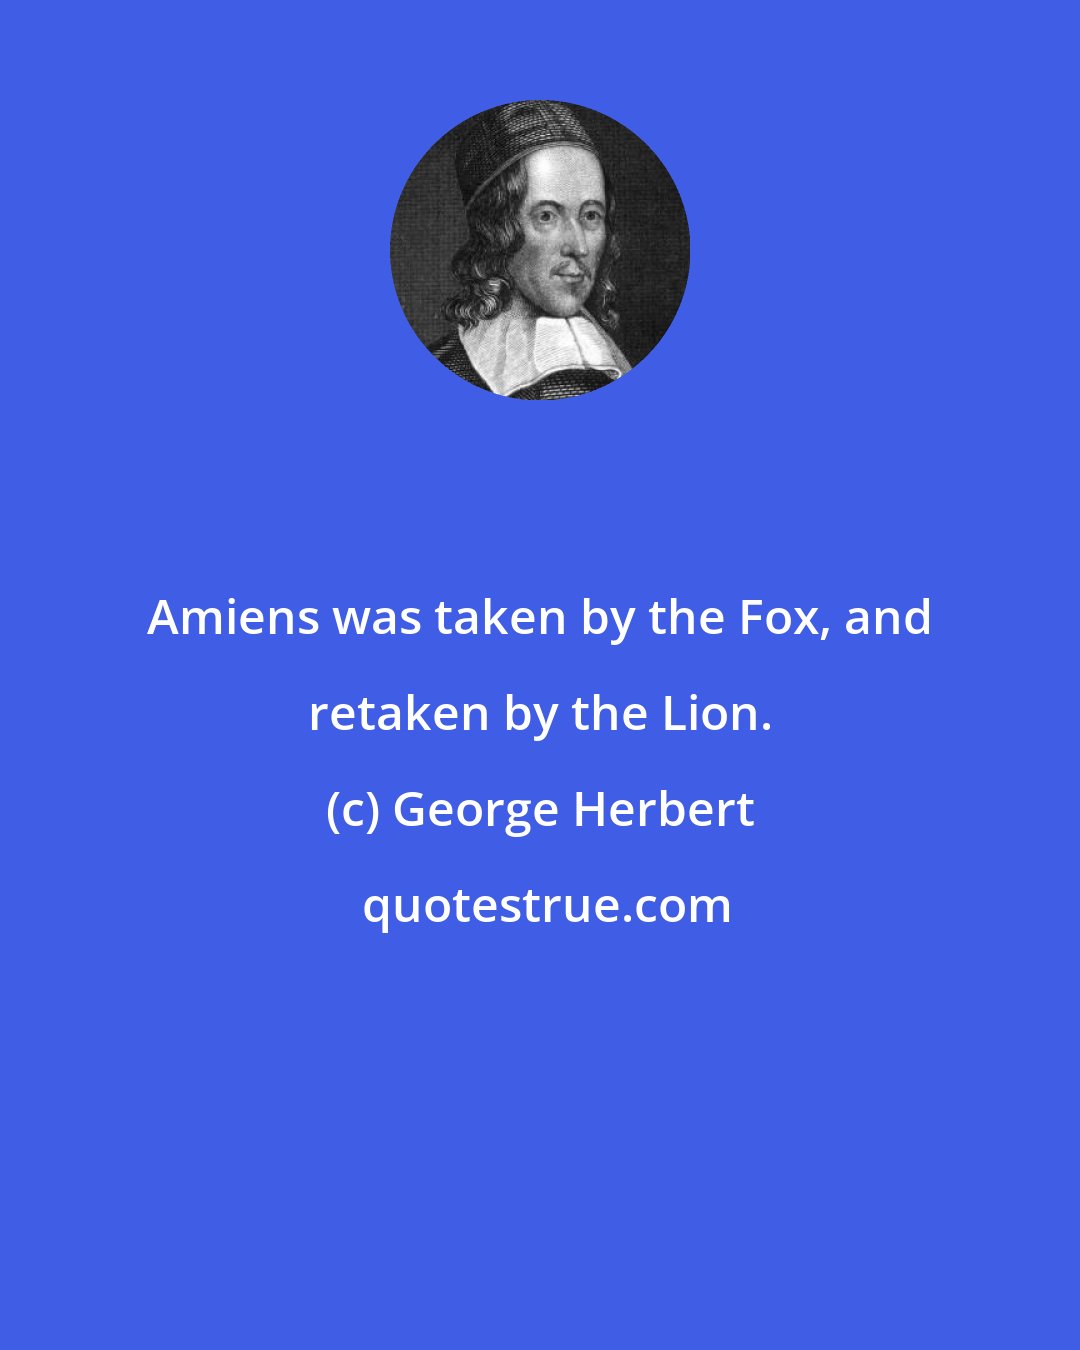 George Herbert: Amiens was taken by the Fox, and retaken by the Lion.